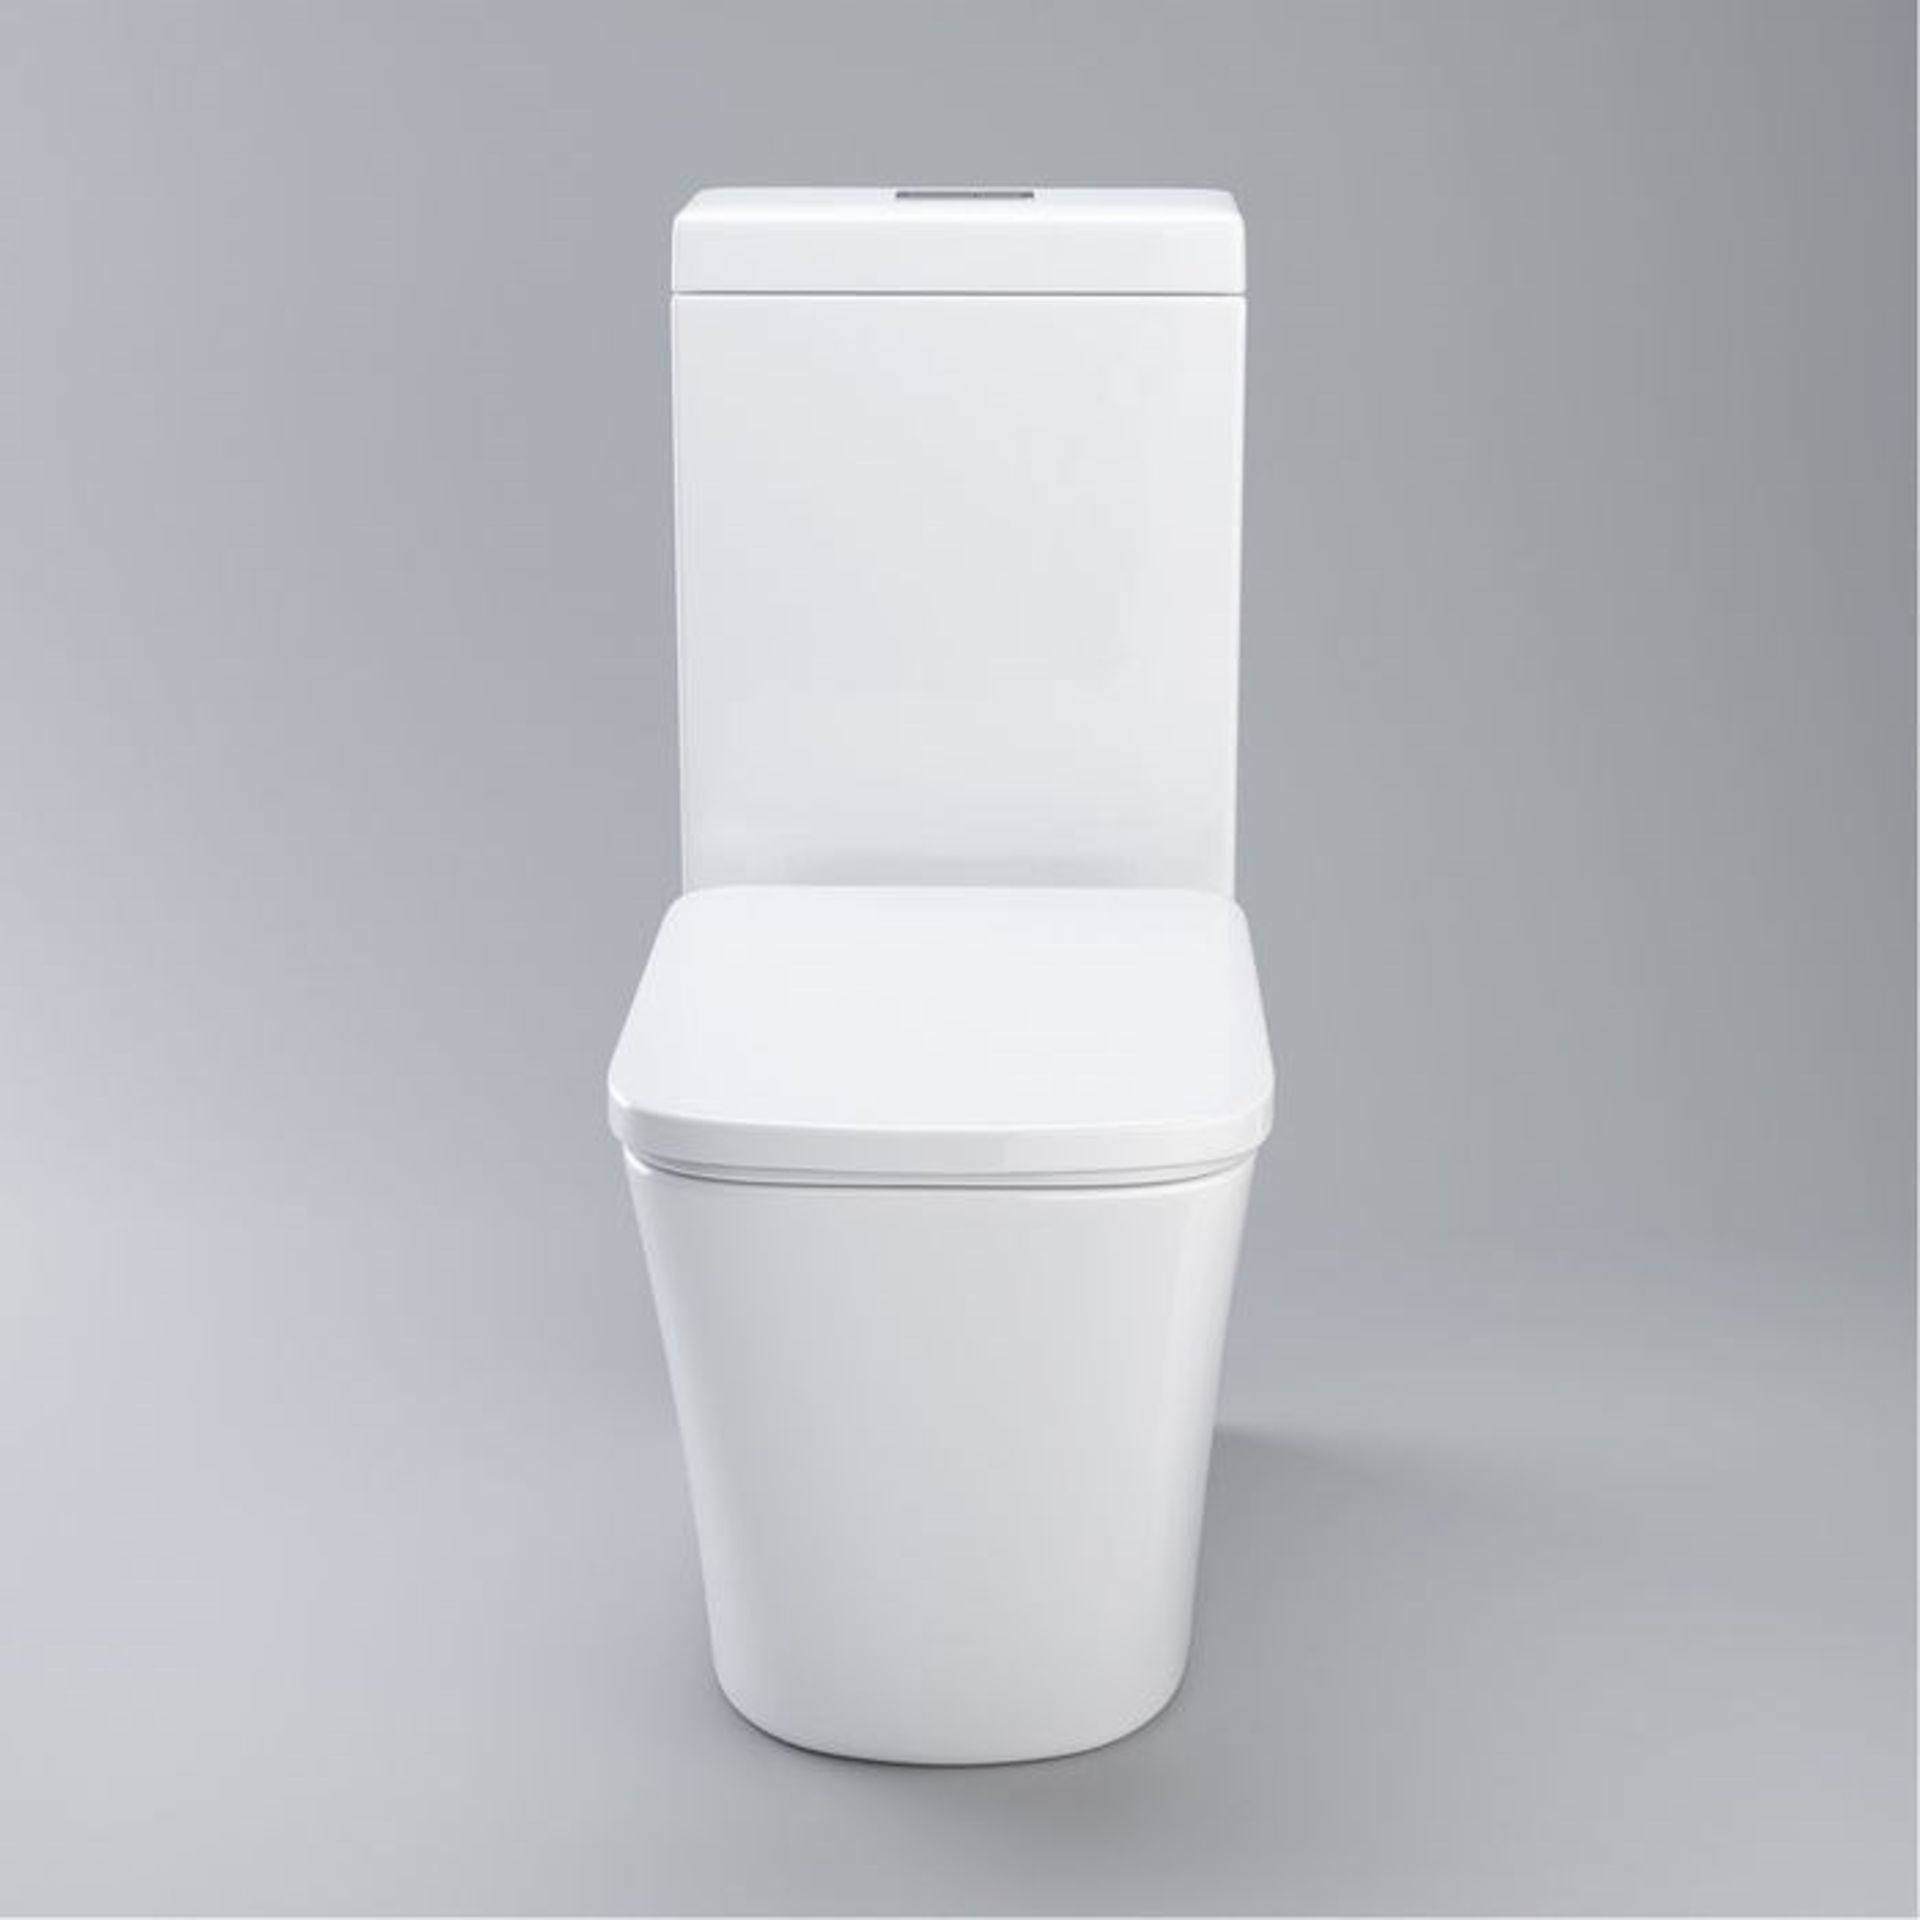 Florence Close Coupled Toilet & Cistern inc Soft Close Seat. Contemporary design finished in a... - Image 3 of 4